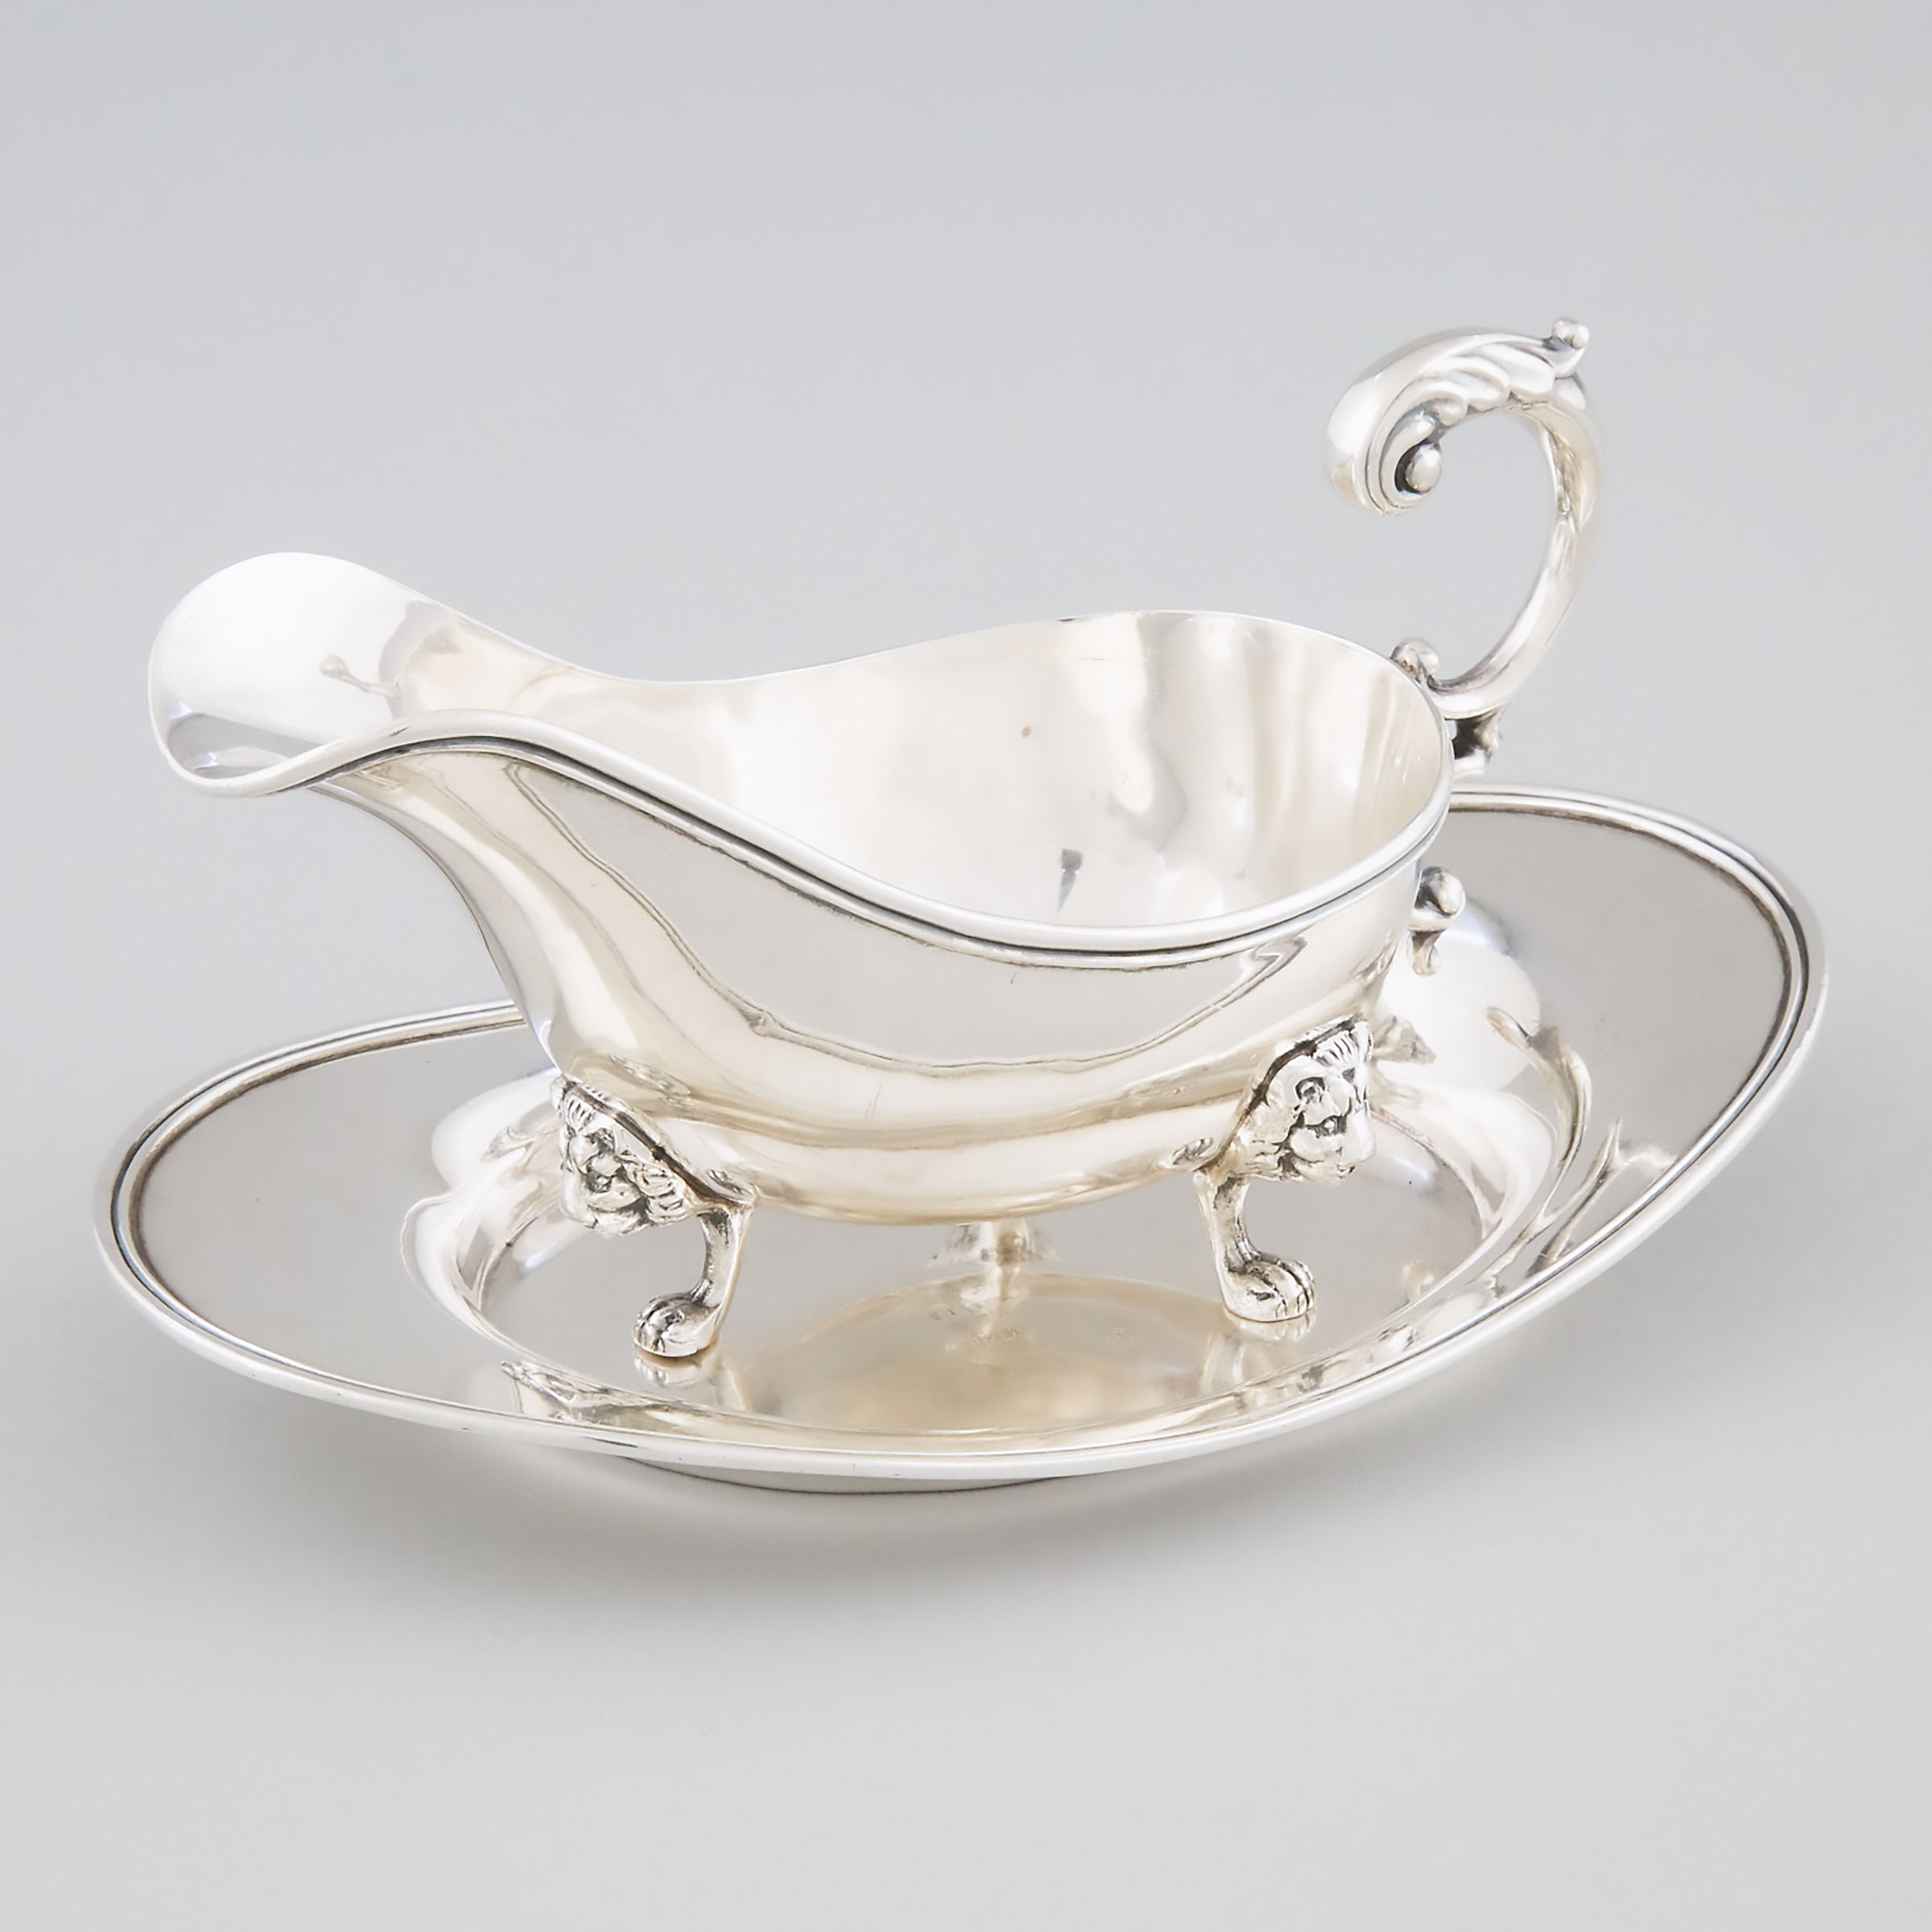 Canadian Silver Sauce Boat and